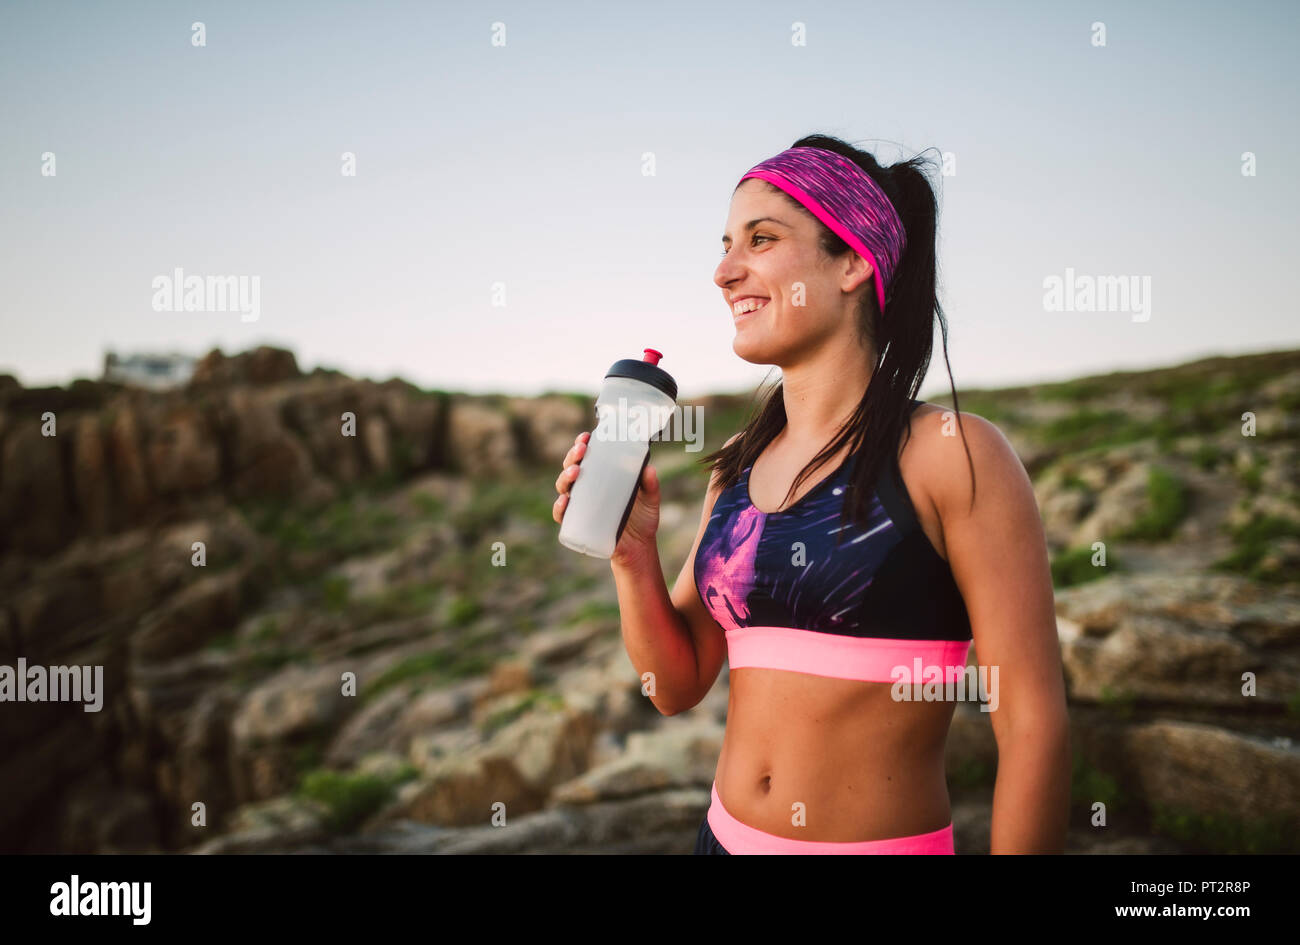 Portrait of an athlete woman drinking water outdoors Stock Photo